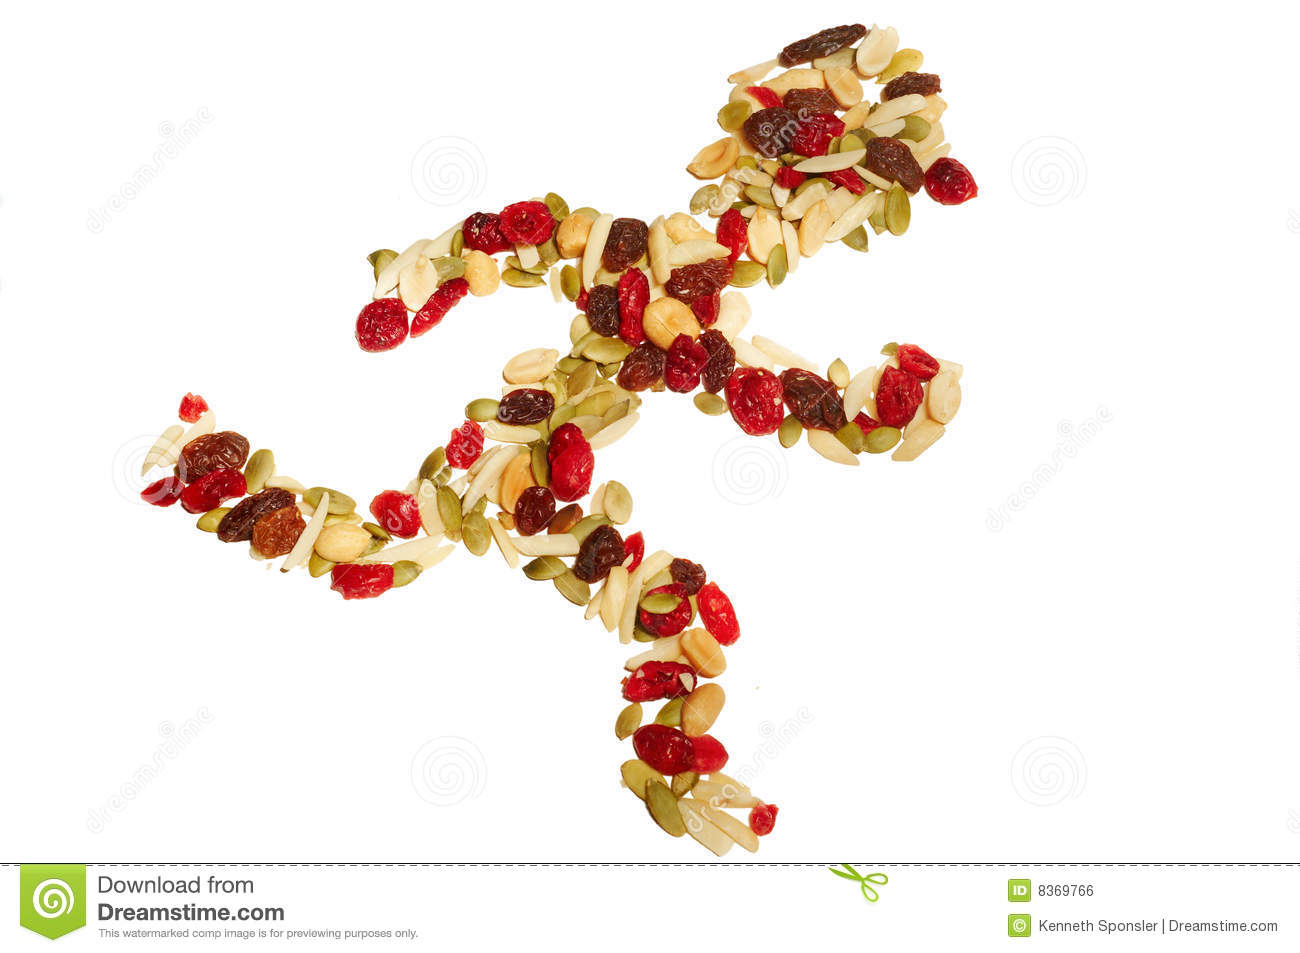 Trail Mix Runner Royalty Free Stock Image   Image  8369766